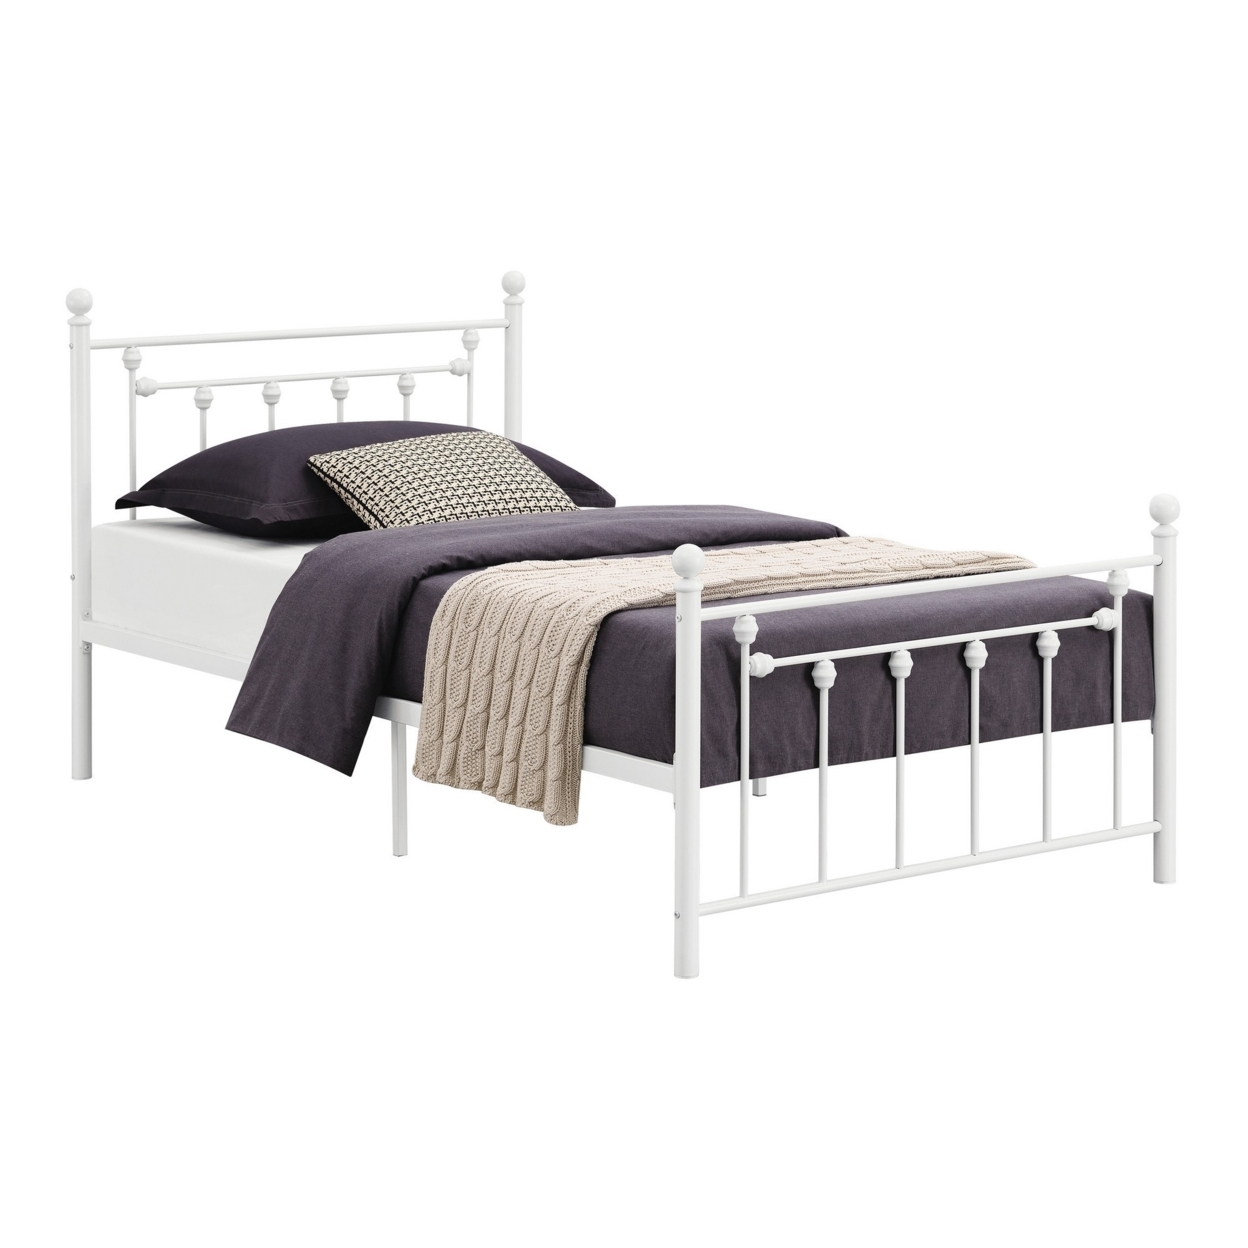 Dio 79 Inch Metal Full Size Bed Frame, Spindle Design, Finial Posts, White